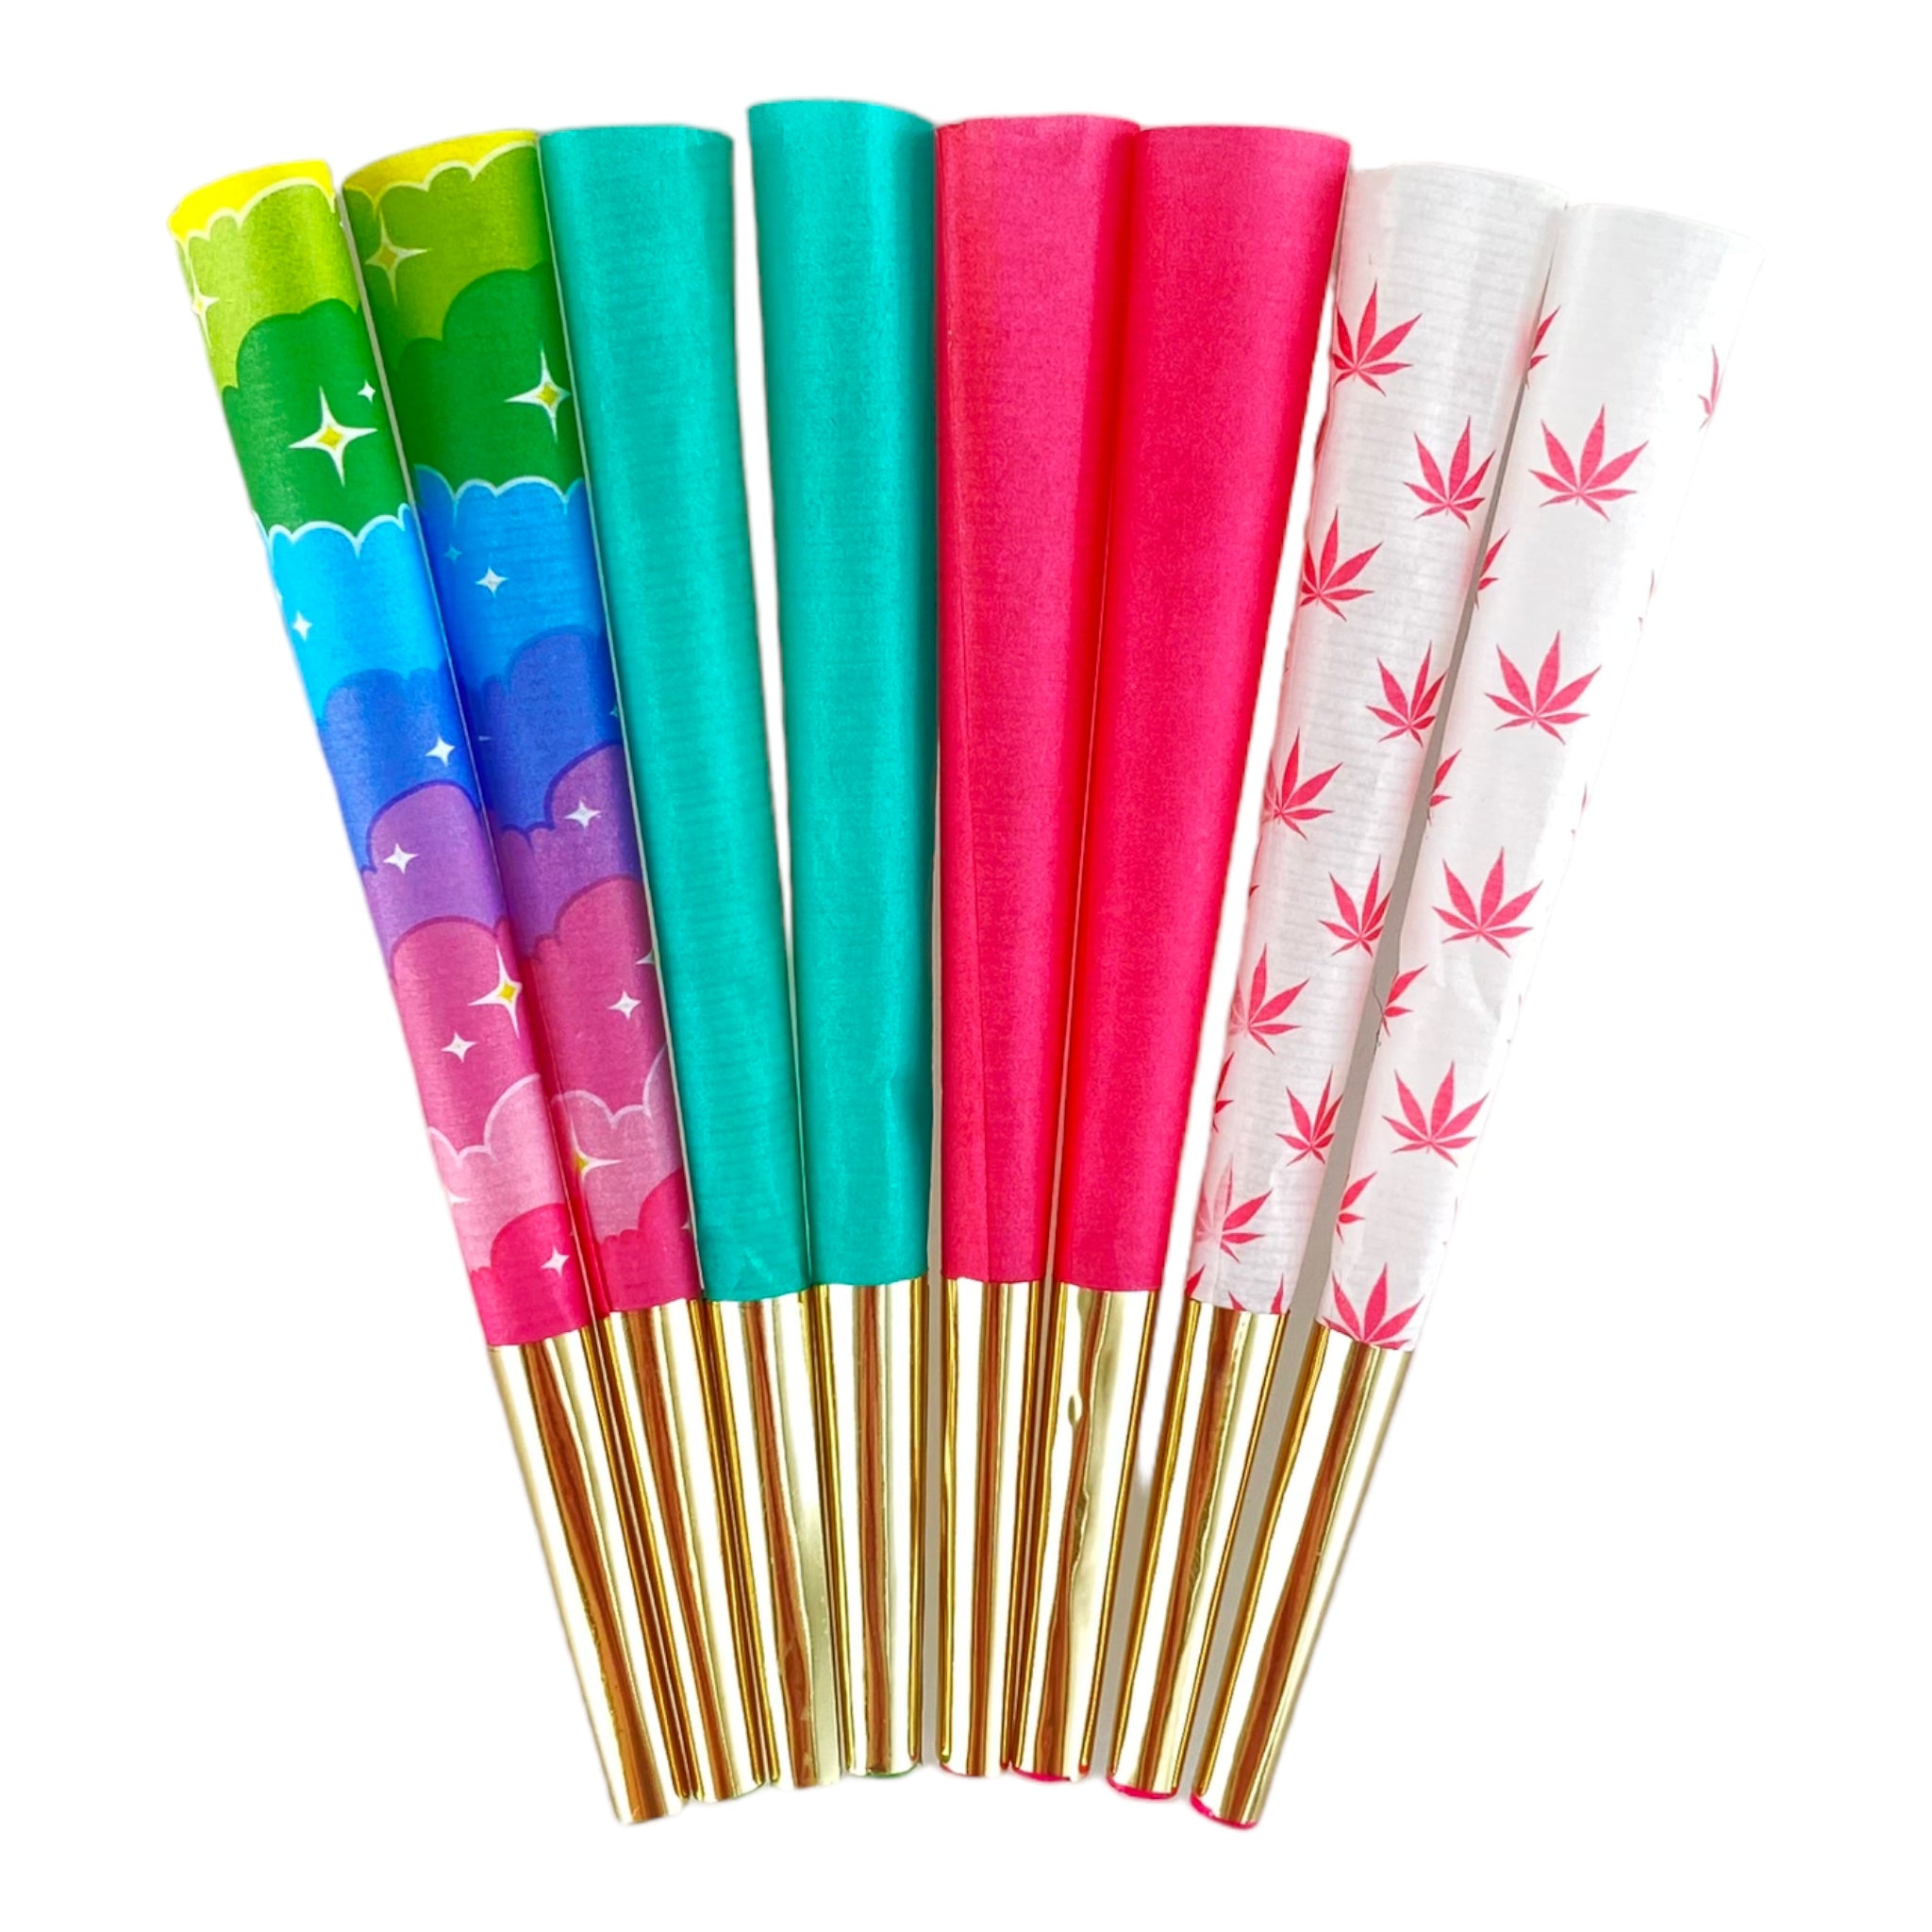 Beautiful Burns Spring Garden Variety Pack Pre Rolled Cones 8ct decorative pretty and cute cones 